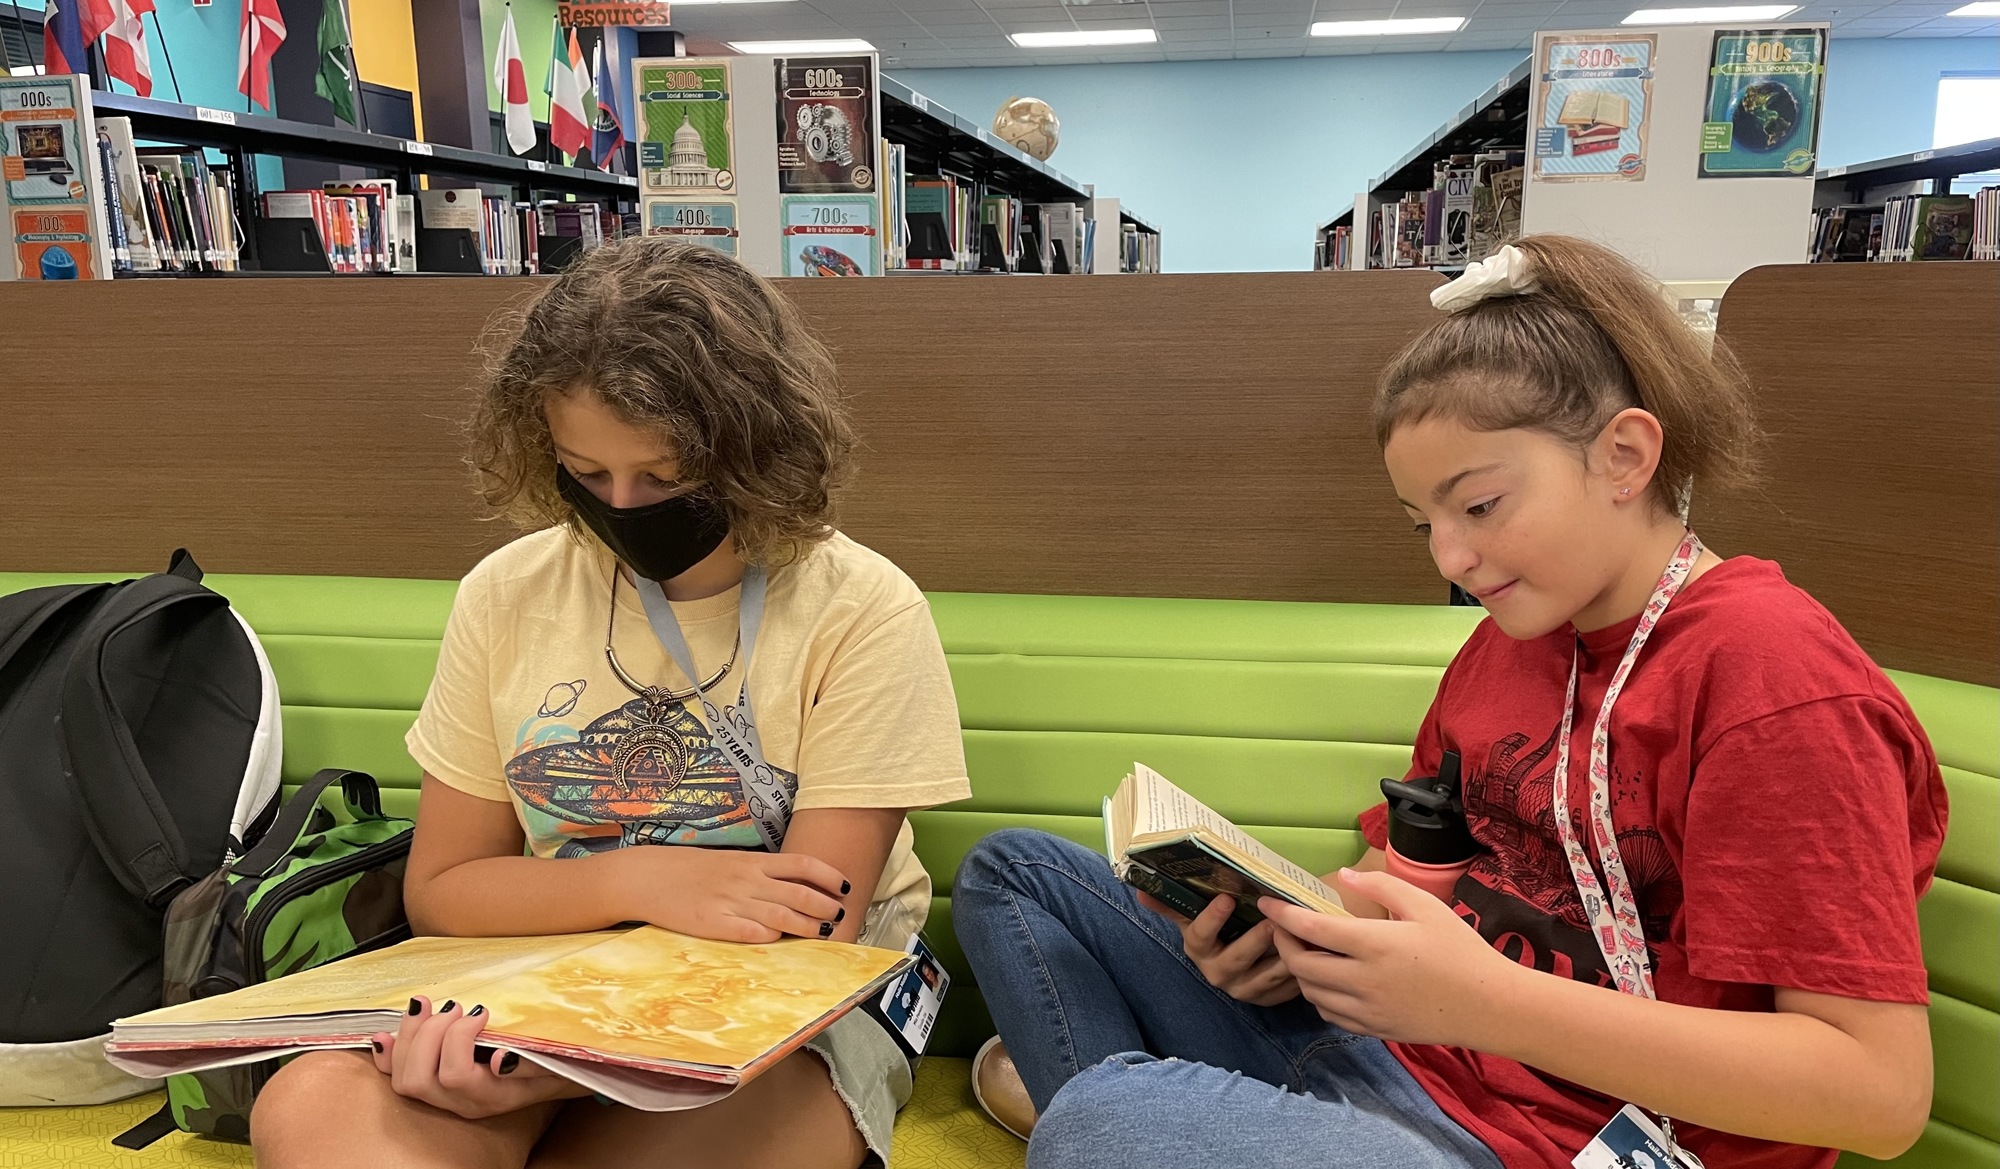 Carlos E. Haile Middle School sixth graders Mia Pereira and Bella Ashley read in the media center. School District of Manatee County students now have access to all Manatee County library resources through the All Access Pass.